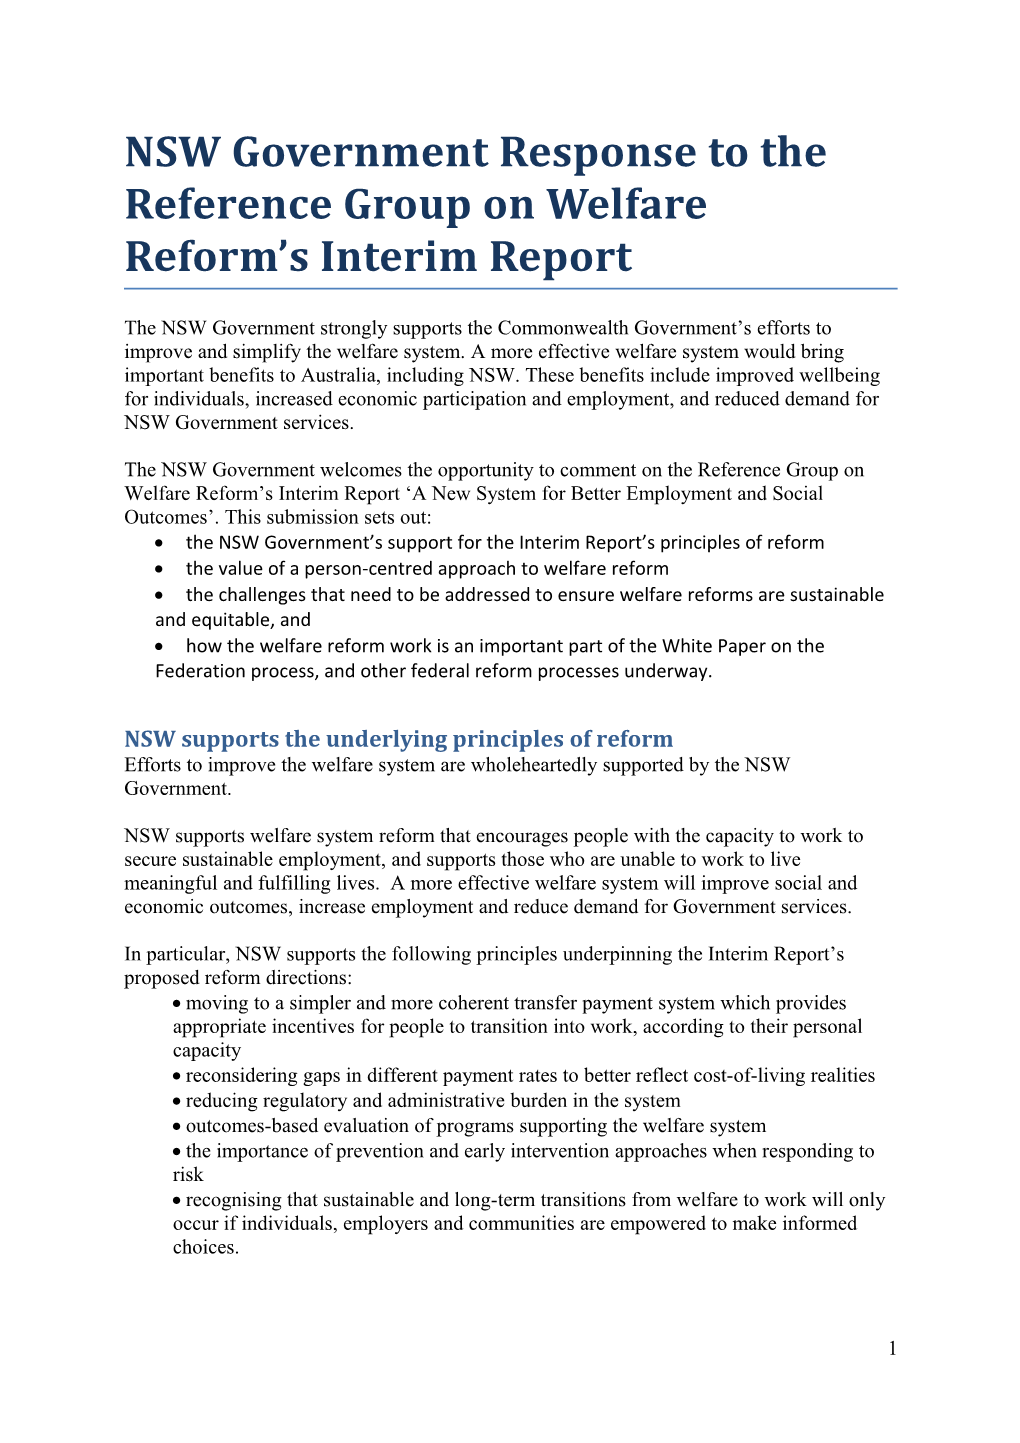 NSW Government Response to the Reference Group on Welfare Reform S Interim Report